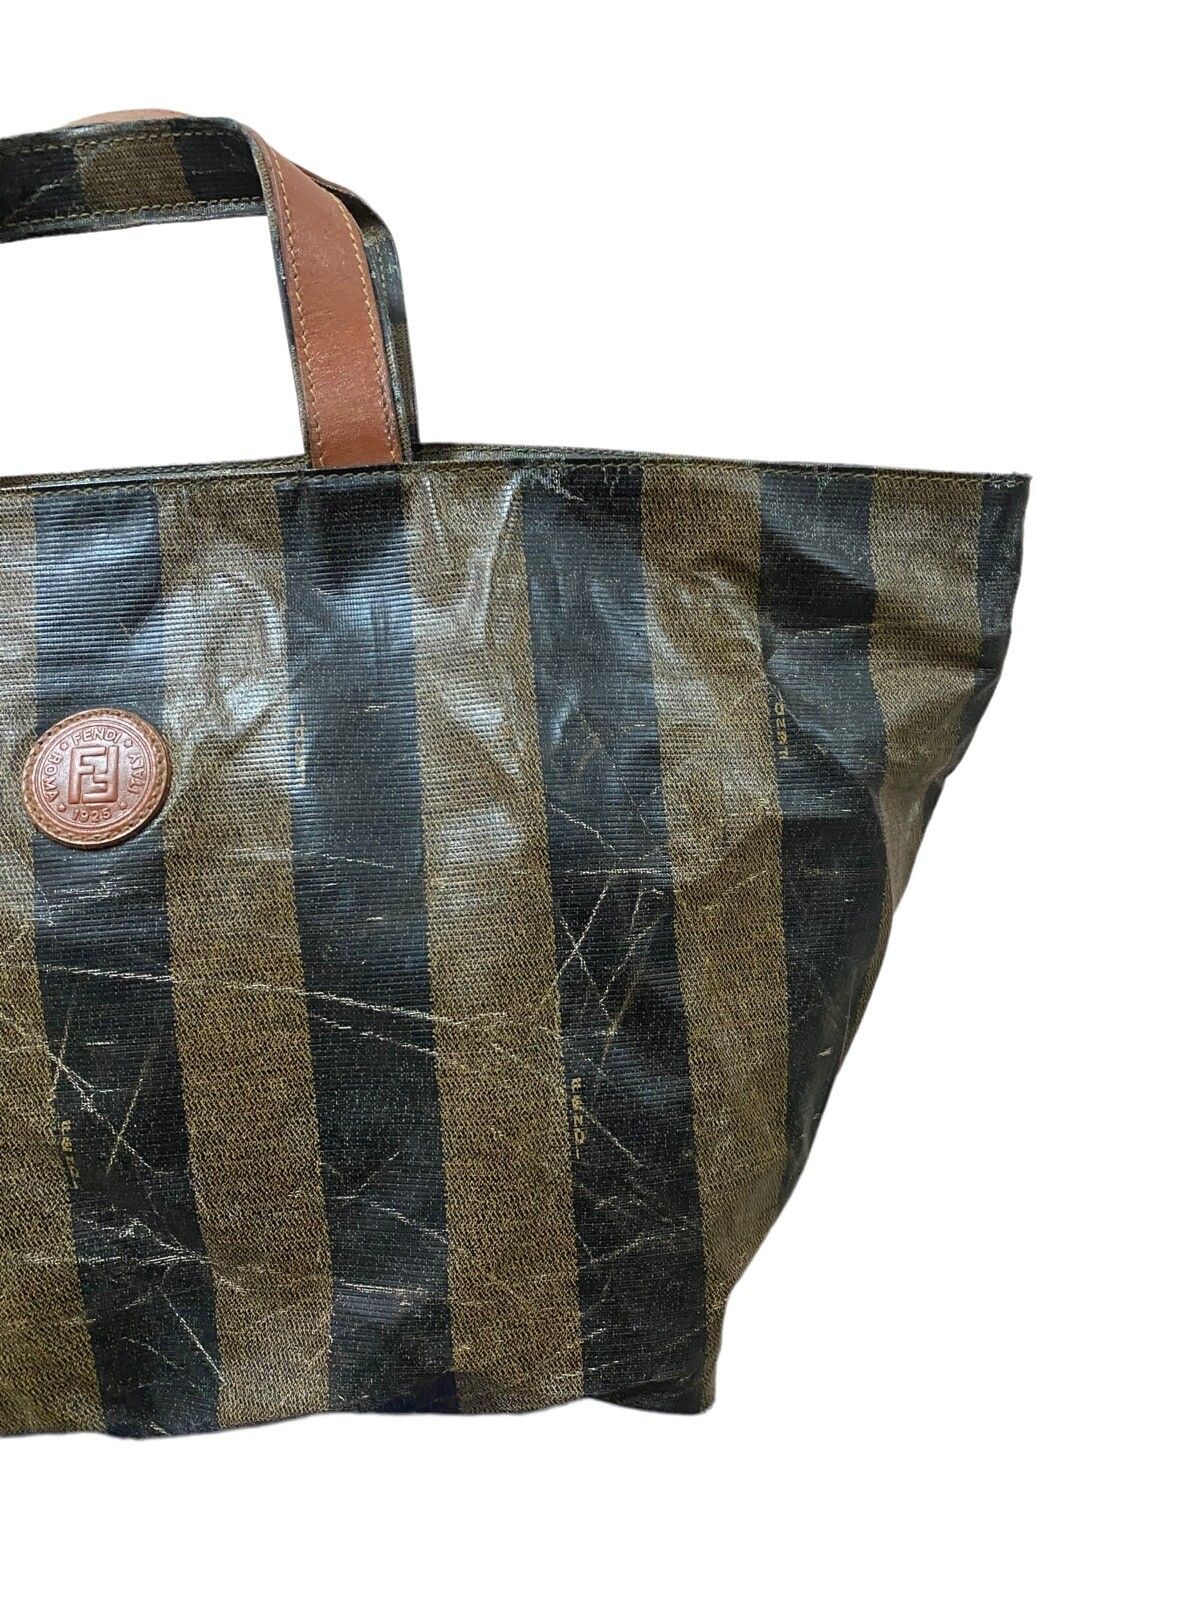 Fendi Roma Pequin Striped Tote Bag Made In Italy - 6